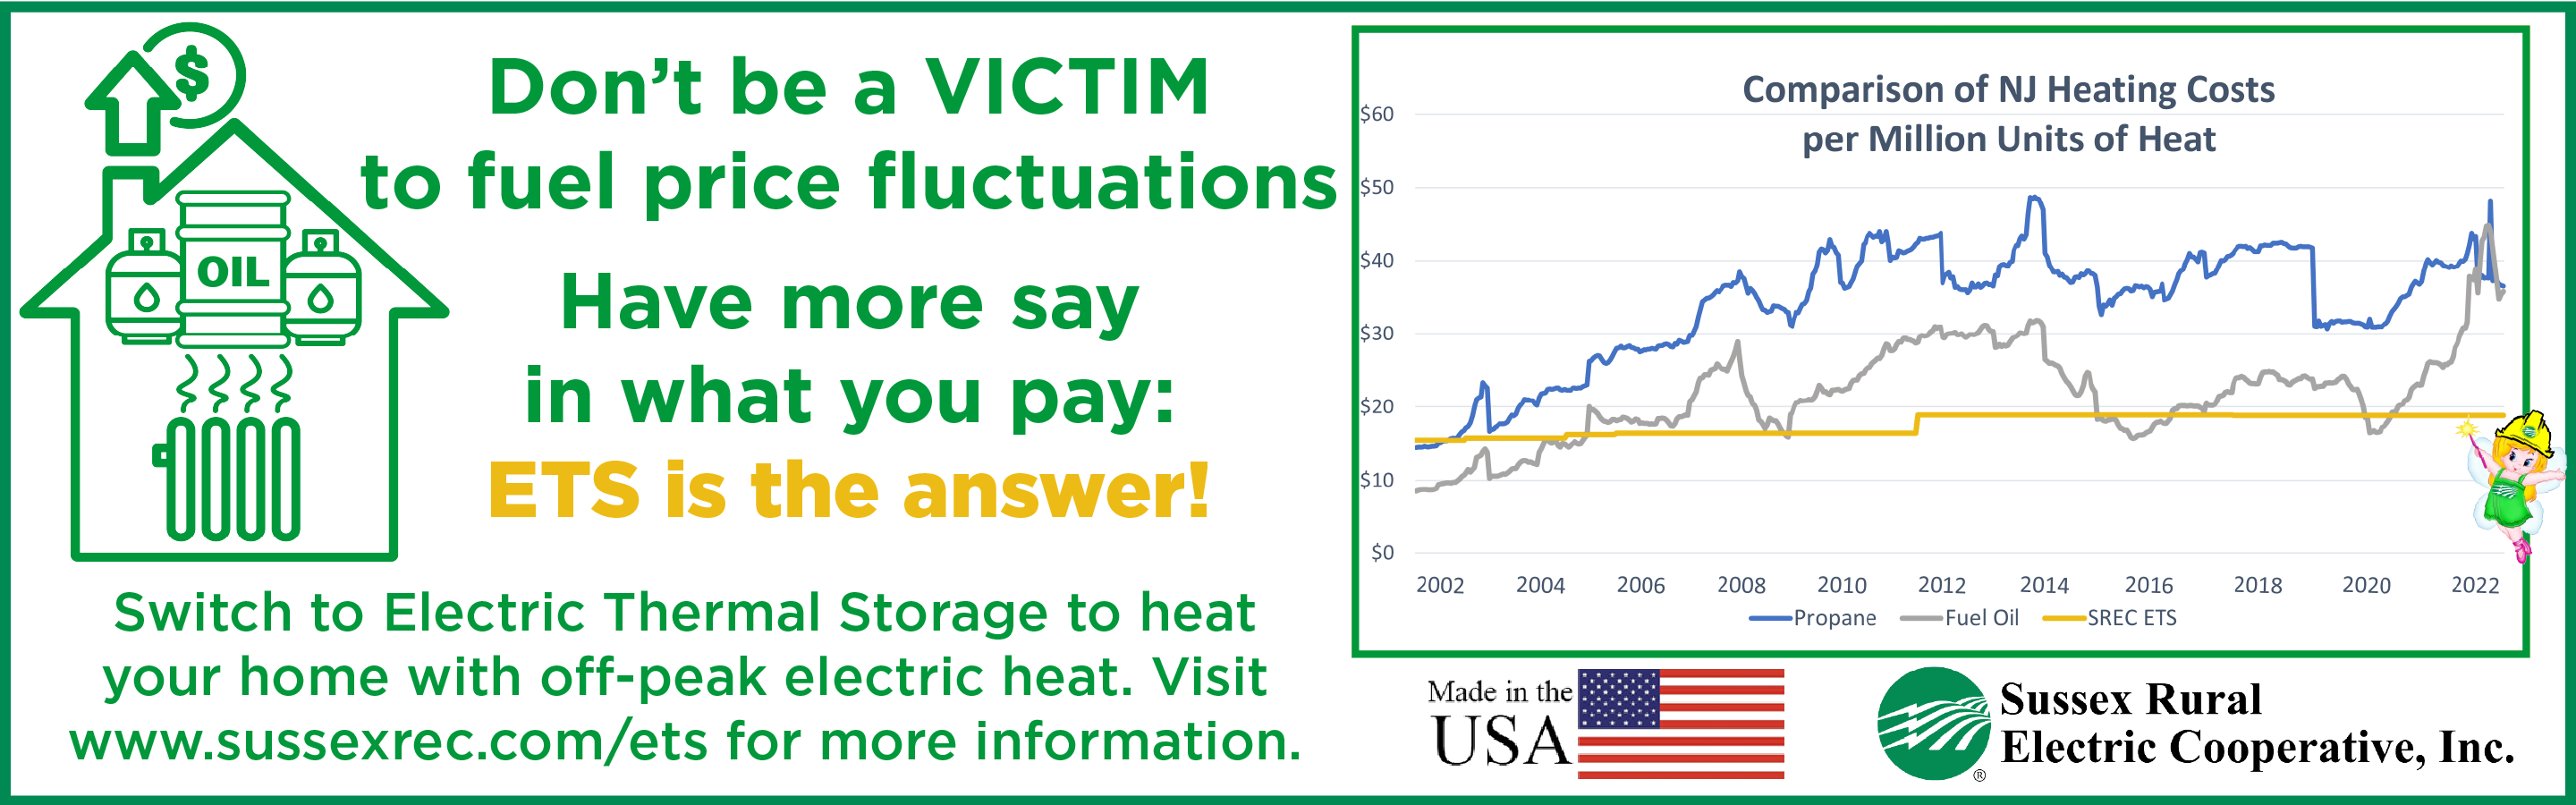 Don't be a VICTIM to fuel price fluctuations. Have more say in what you pay: ETS is the answer! Switch to Electric Thermal Storage to heat your home with off-peak electric heat. Visit www.sussexrec.com/ets for more information.